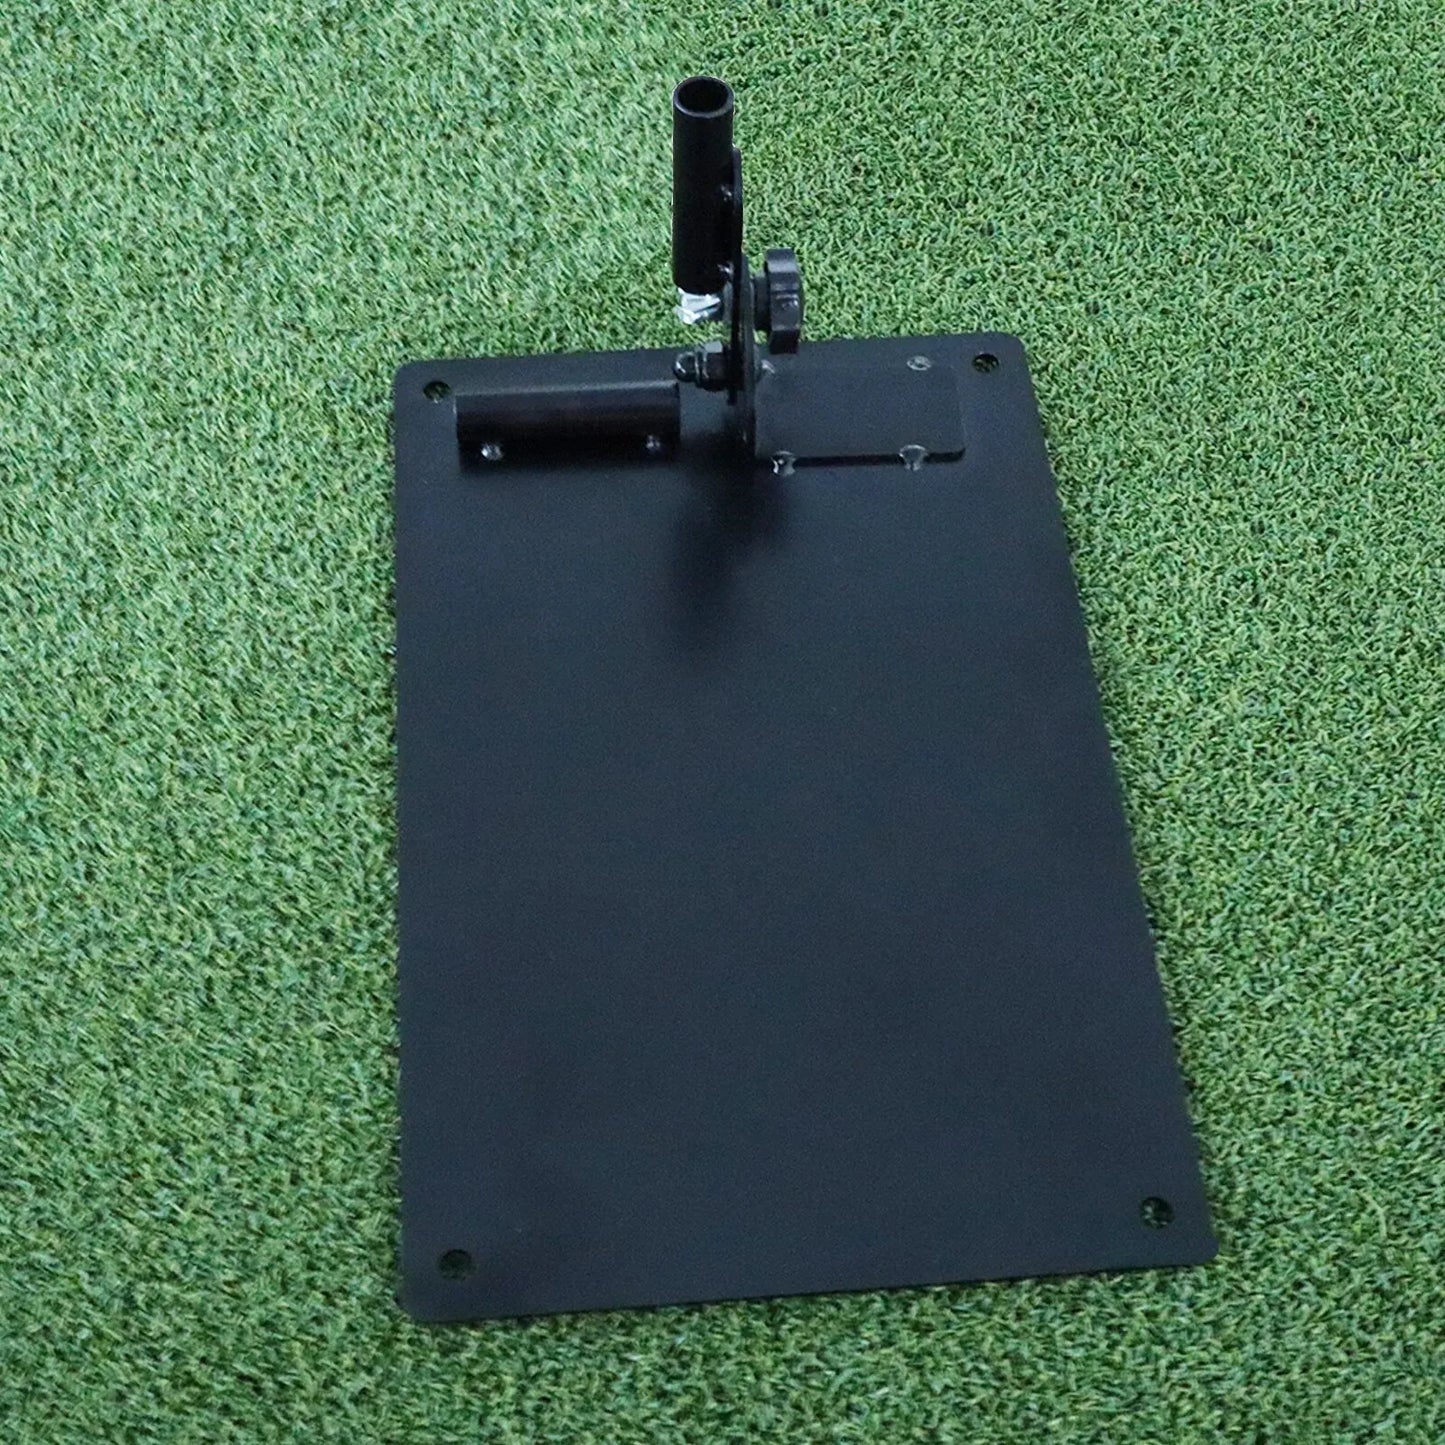 FINGER TEN Golf Alignment Stick Holder | Swing Practice Plate Plane Trainer | Training Aid with Alignment Stick Base